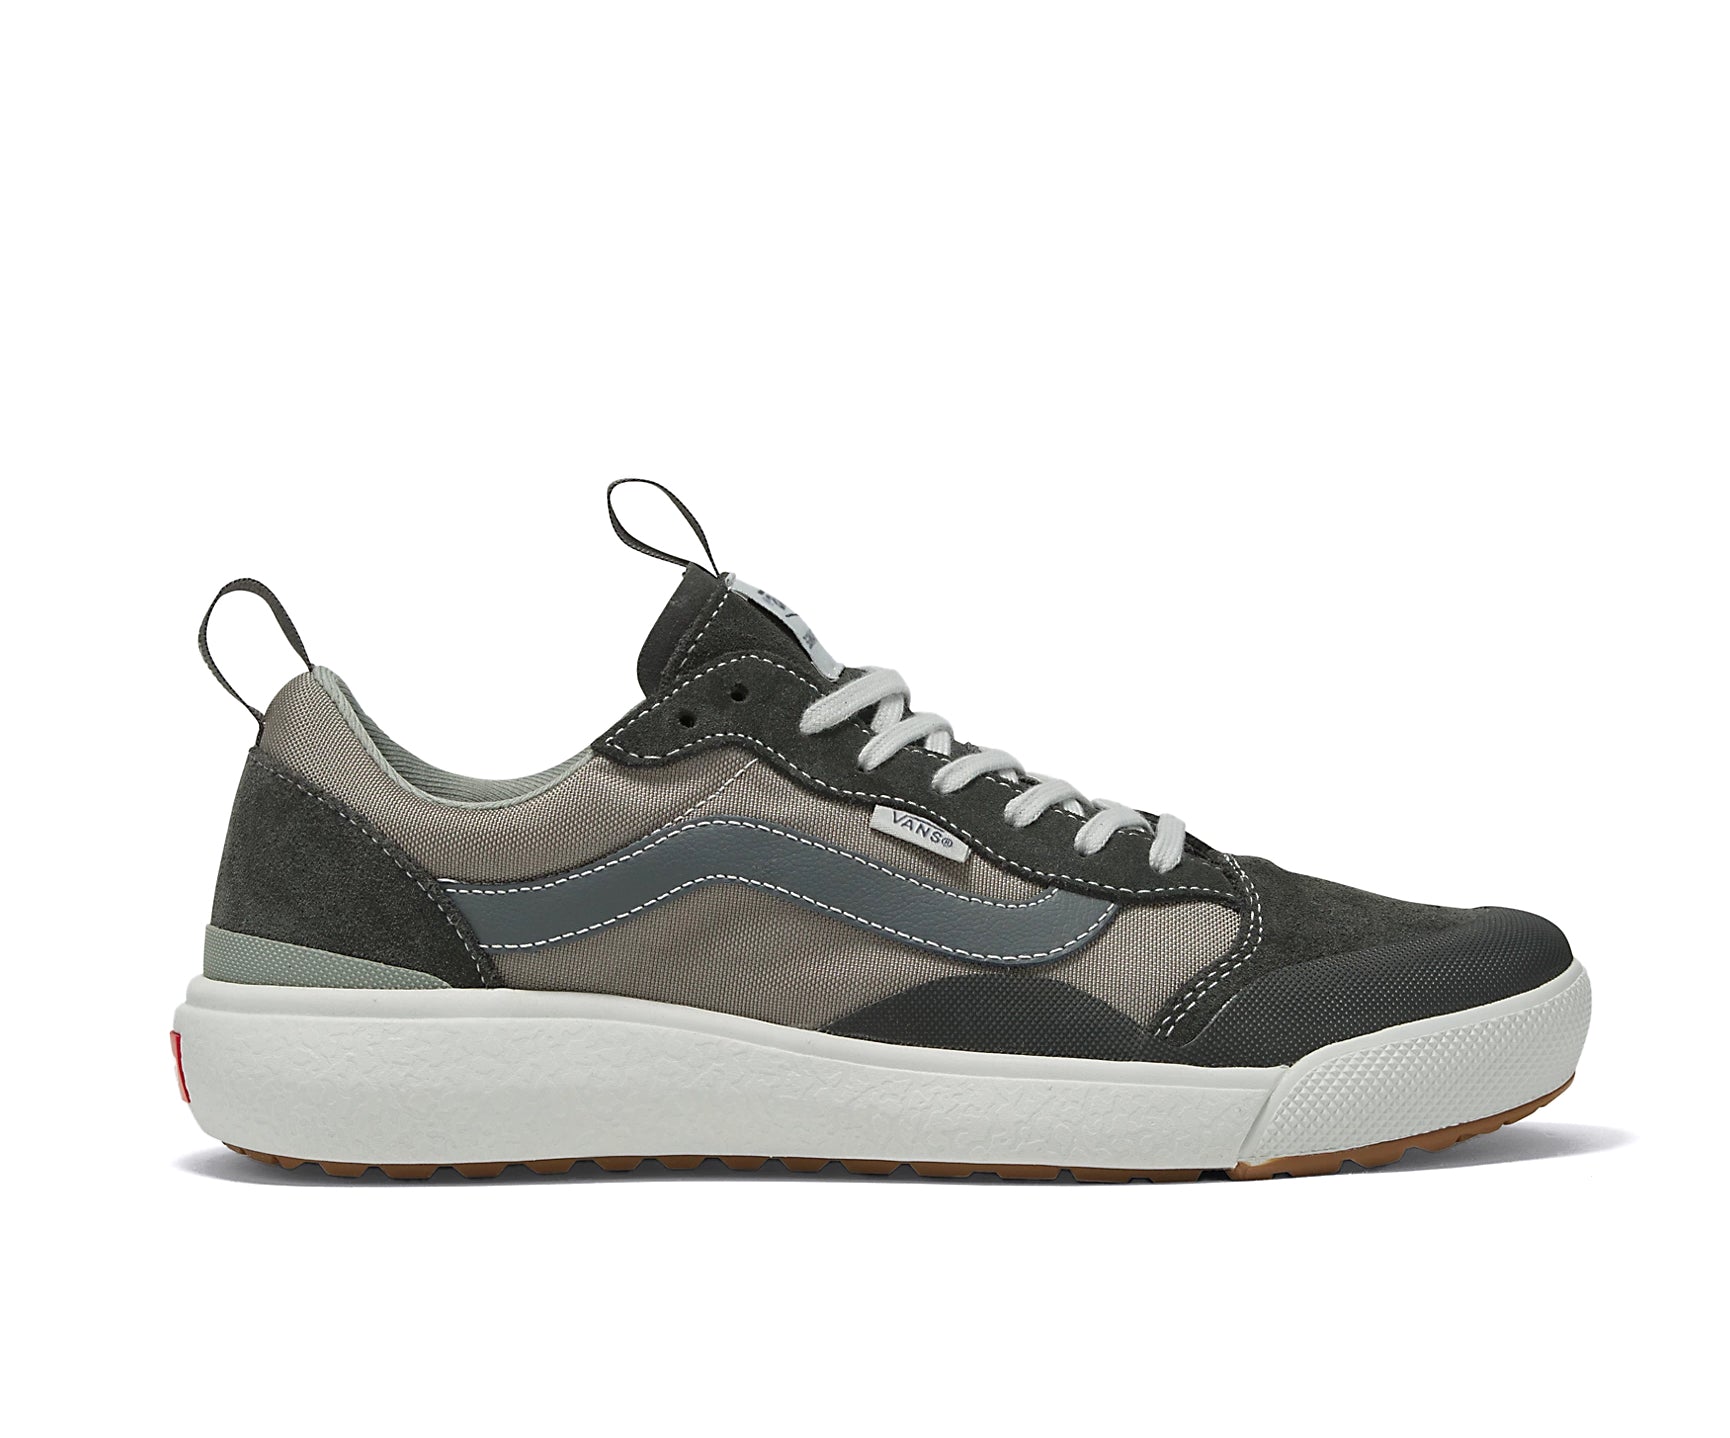 A suede and textile multicolored grey Vans sneaker.